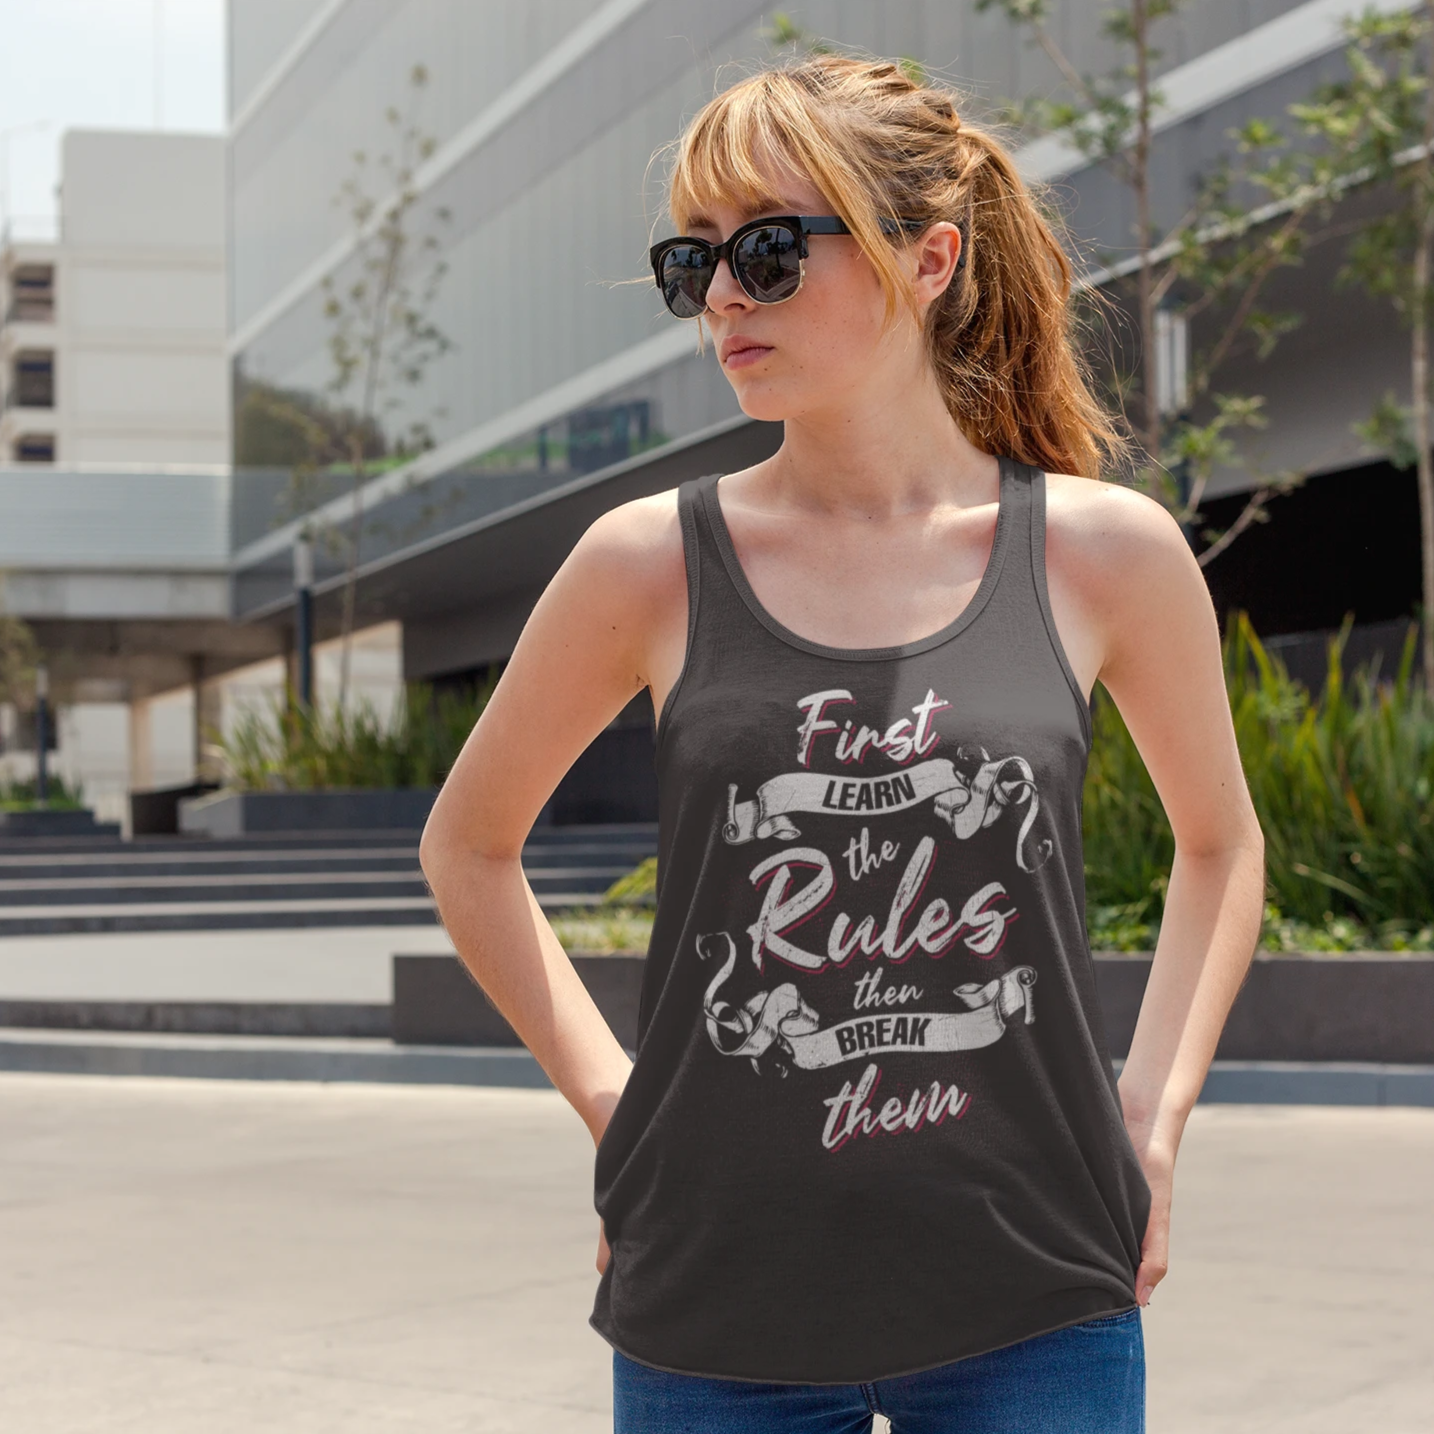 First Learn The Rules - Bella Tank